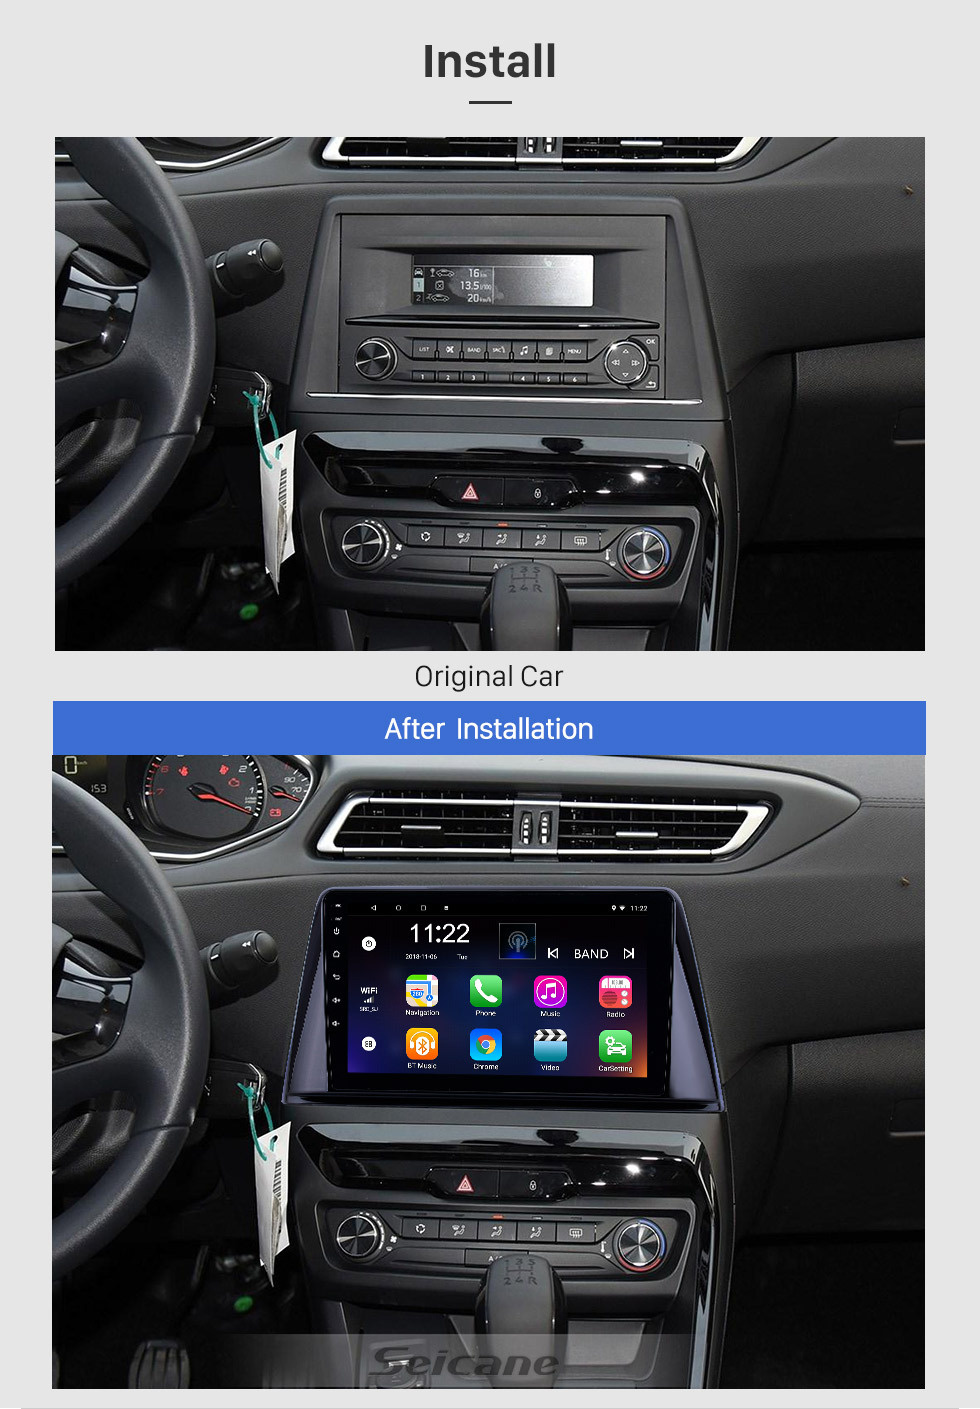 HD Touchscreen 9 inch Android GPS Navigation Radio for 2016-2018 Peugeot 308 Bluetooth AUX Carplay Steering Wheel